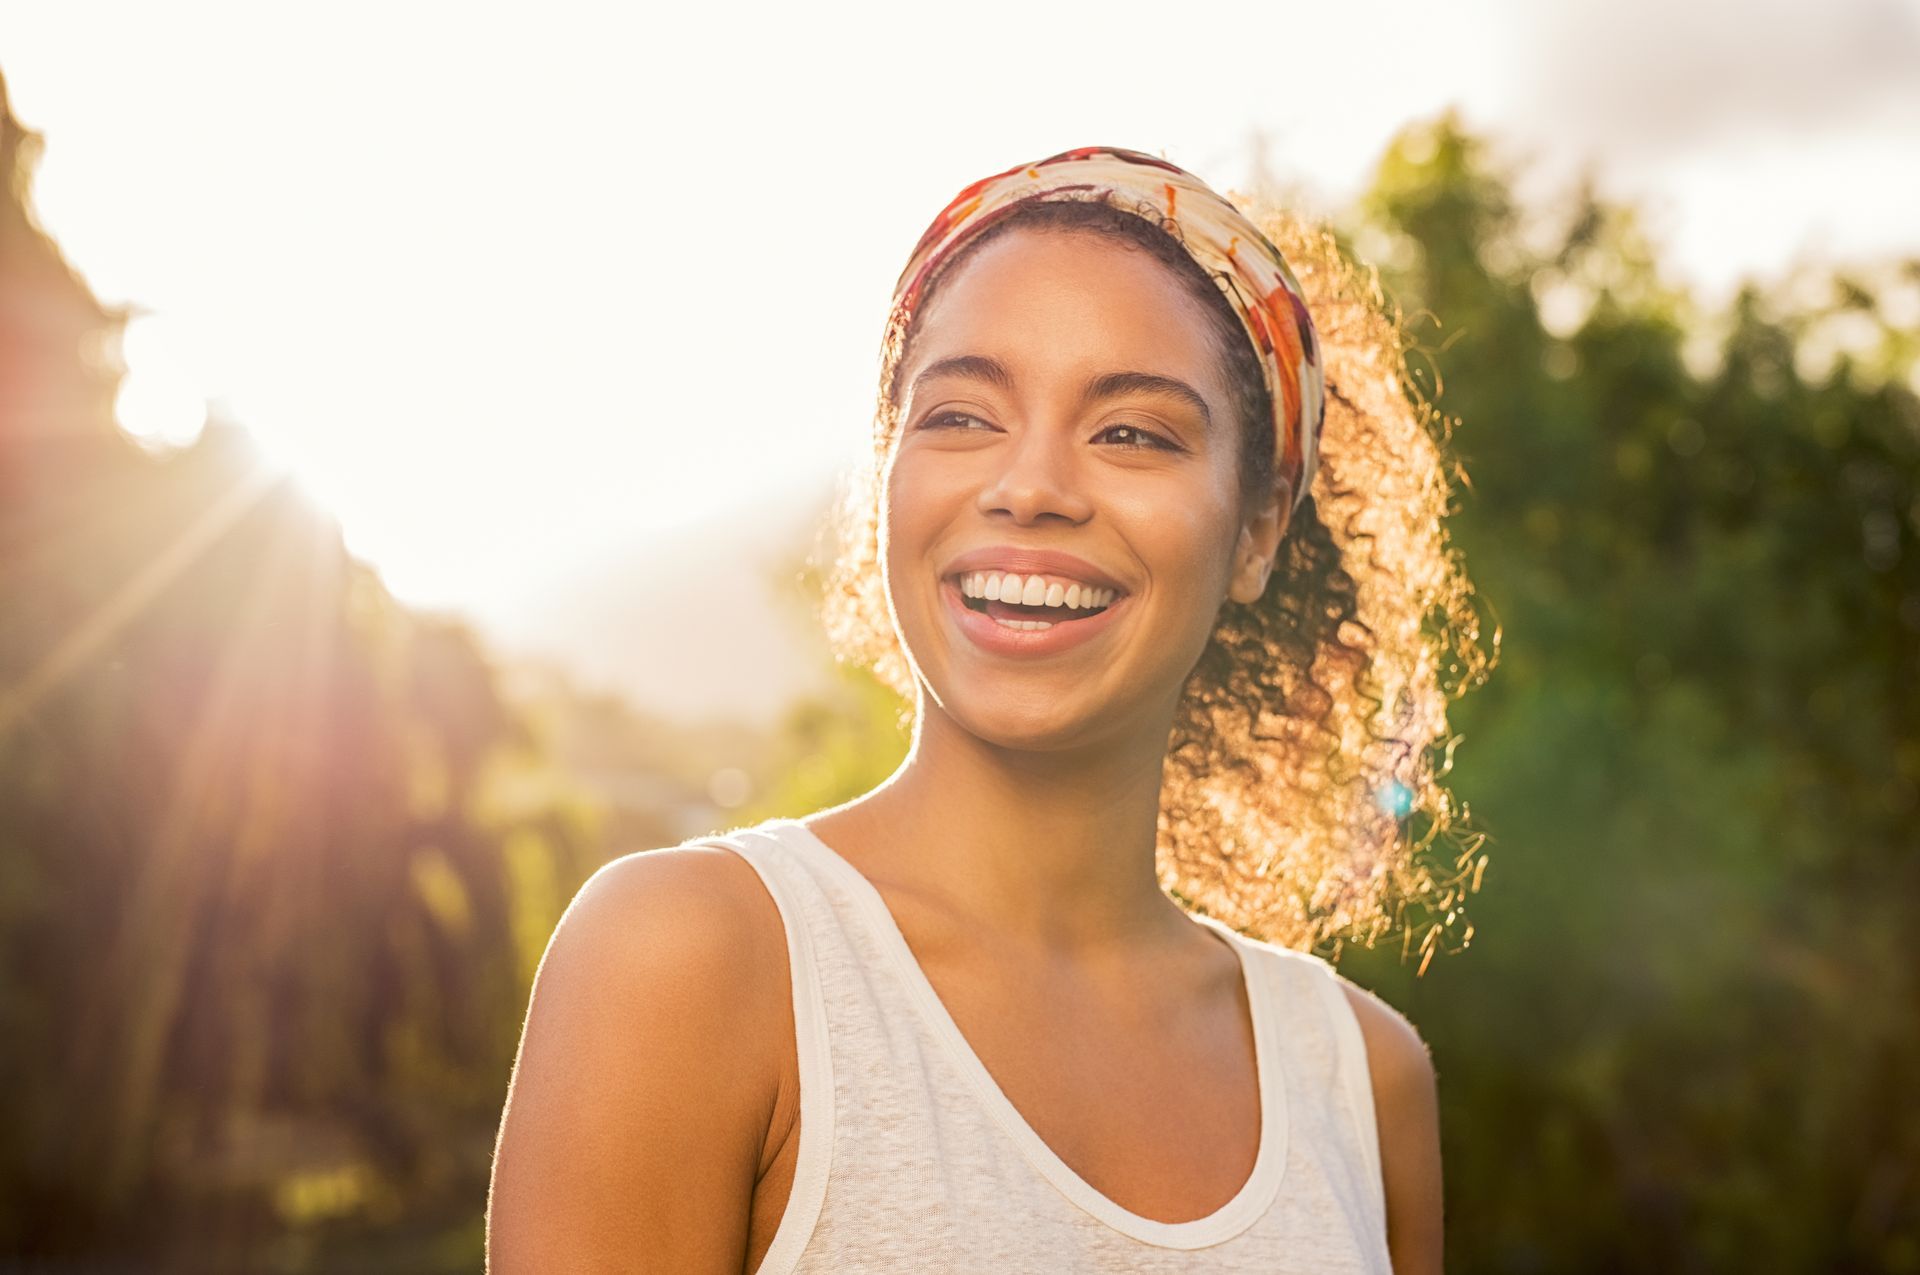 A woman wearing a headband is smiling in the sunlight.